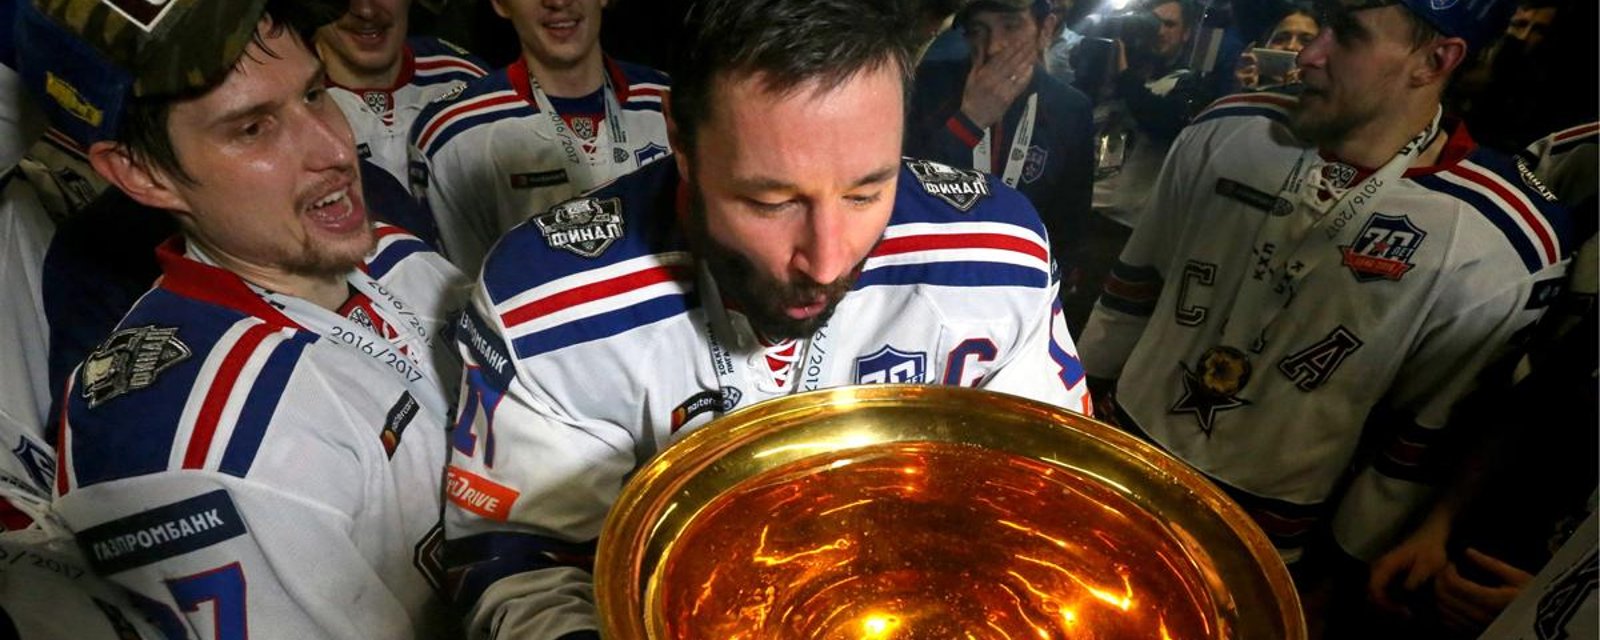 Shocking detail emerges about Kovalchuk stay in the KHL. 